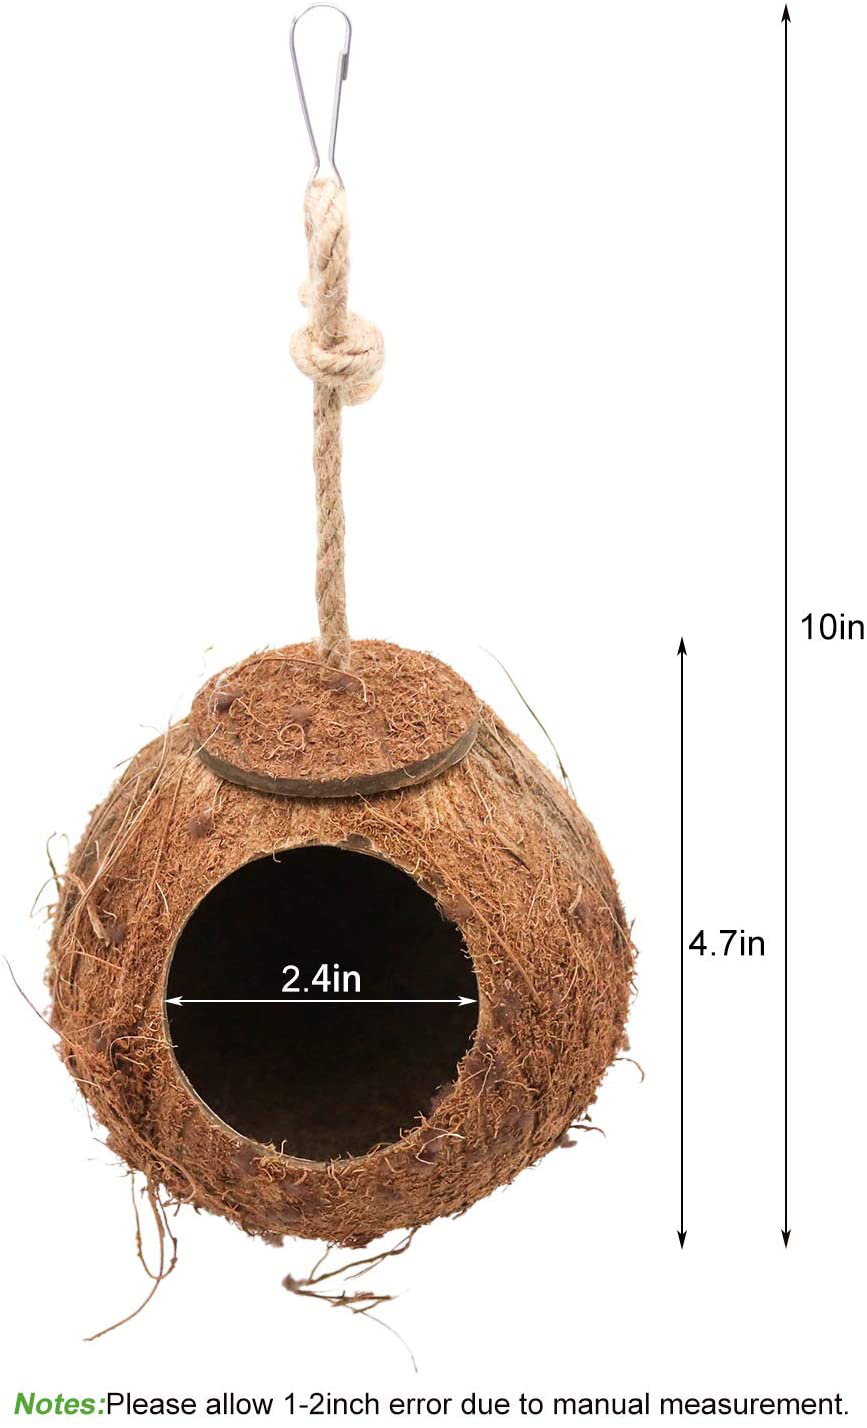 Crested Gecko Coco Hut Shell Bird House, Sturdy Hanging Home, Climbing Porch, Hiding, Sleeping&Breeding Pad, Rough Texture Encourages Foot and Beak Exercise, Suitable for Reptiles, Amphibians Animals & Pet Supplies > Pet Supplies > Reptile & Amphibian Supplies > Reptile & Amphibian Habitat Accessories suruikei   